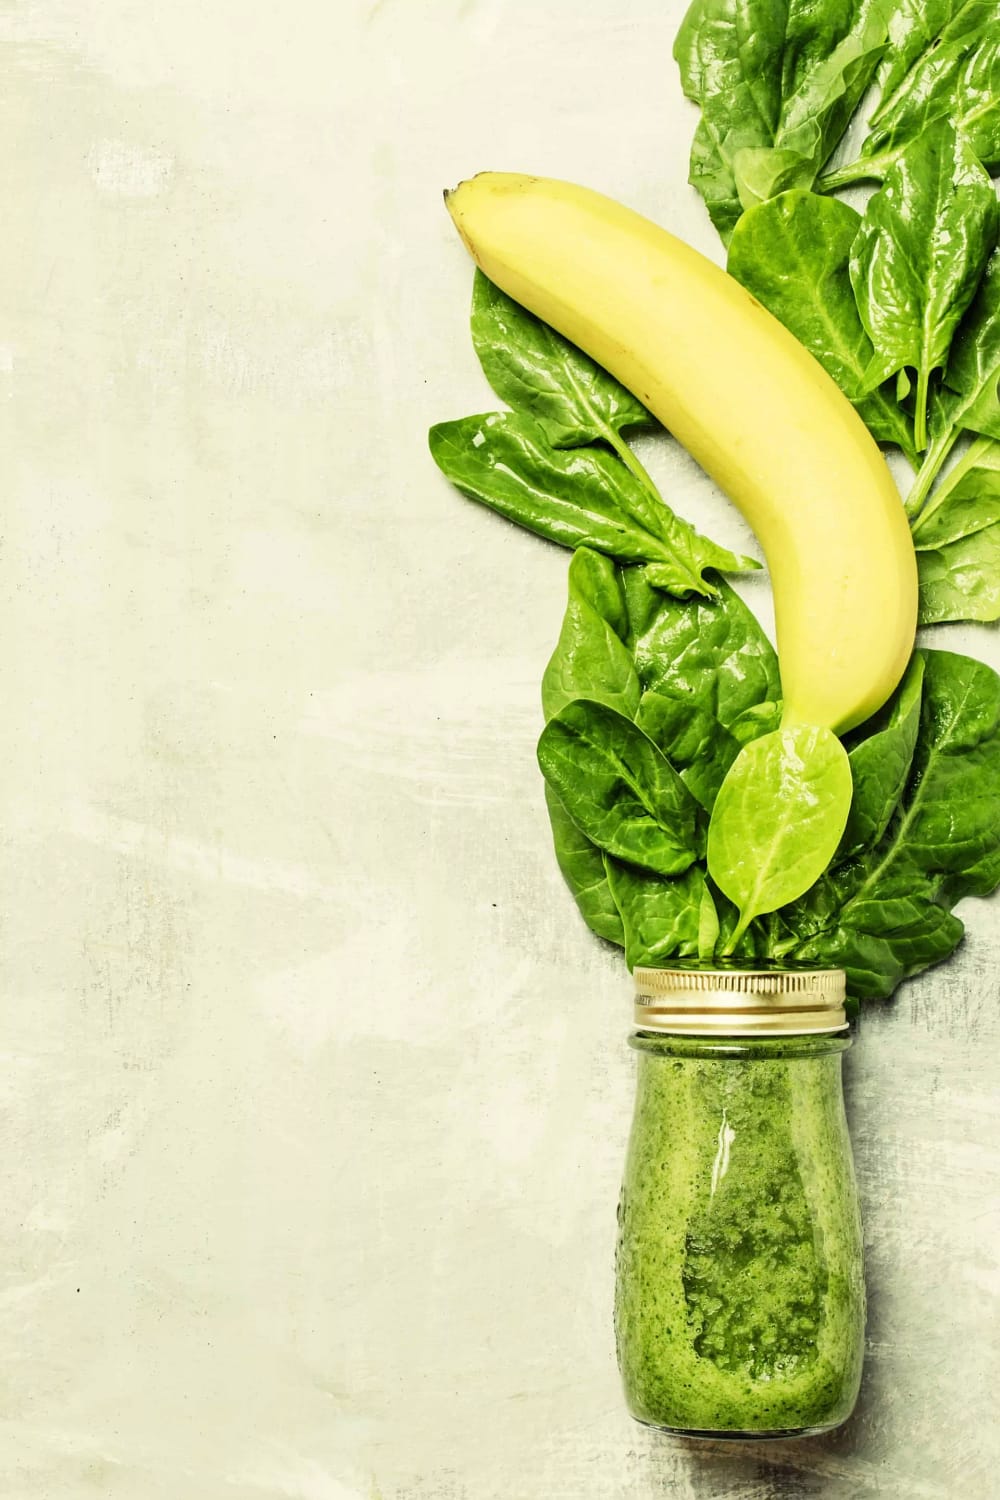 Spinach and banana green smoothies in a glass bottle, gray background